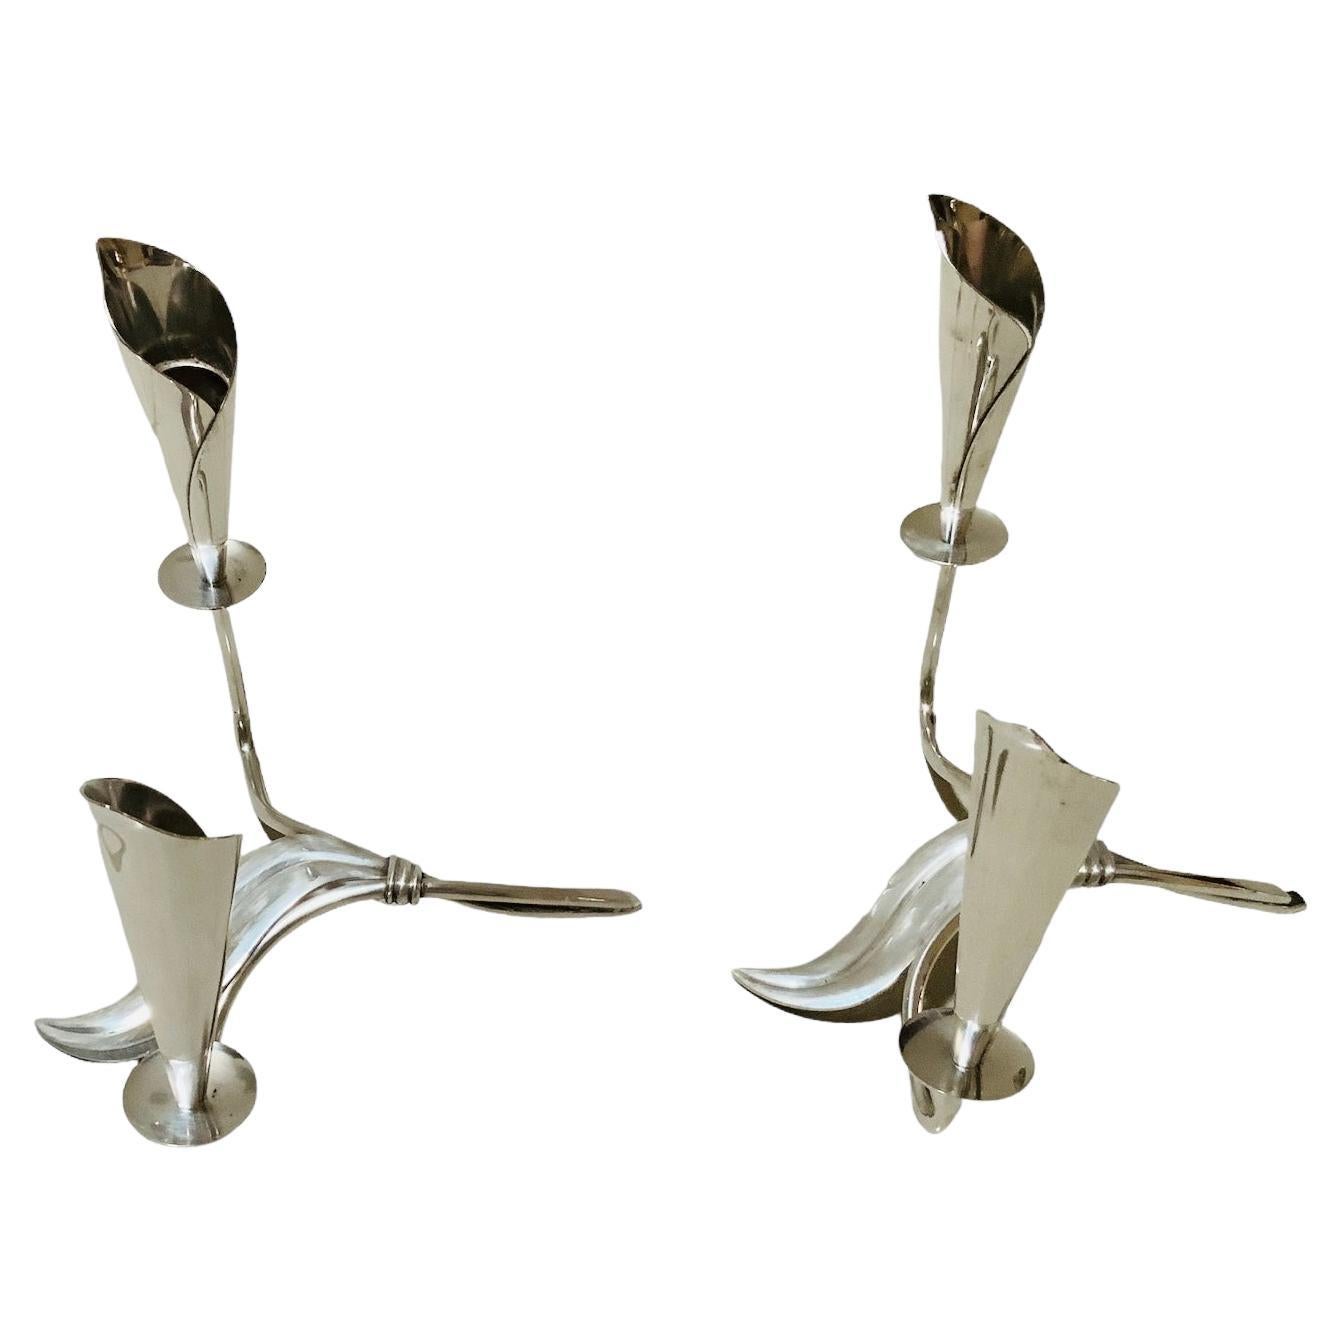 This is a Pair of Silver Plate Candle holders by Hans Jensen. It depicts a pair of silver plate double candle holders shaped as two Calla Lily flowers  branches joined together with a long leaf in the center. Both of them are hallmarked Denmark and